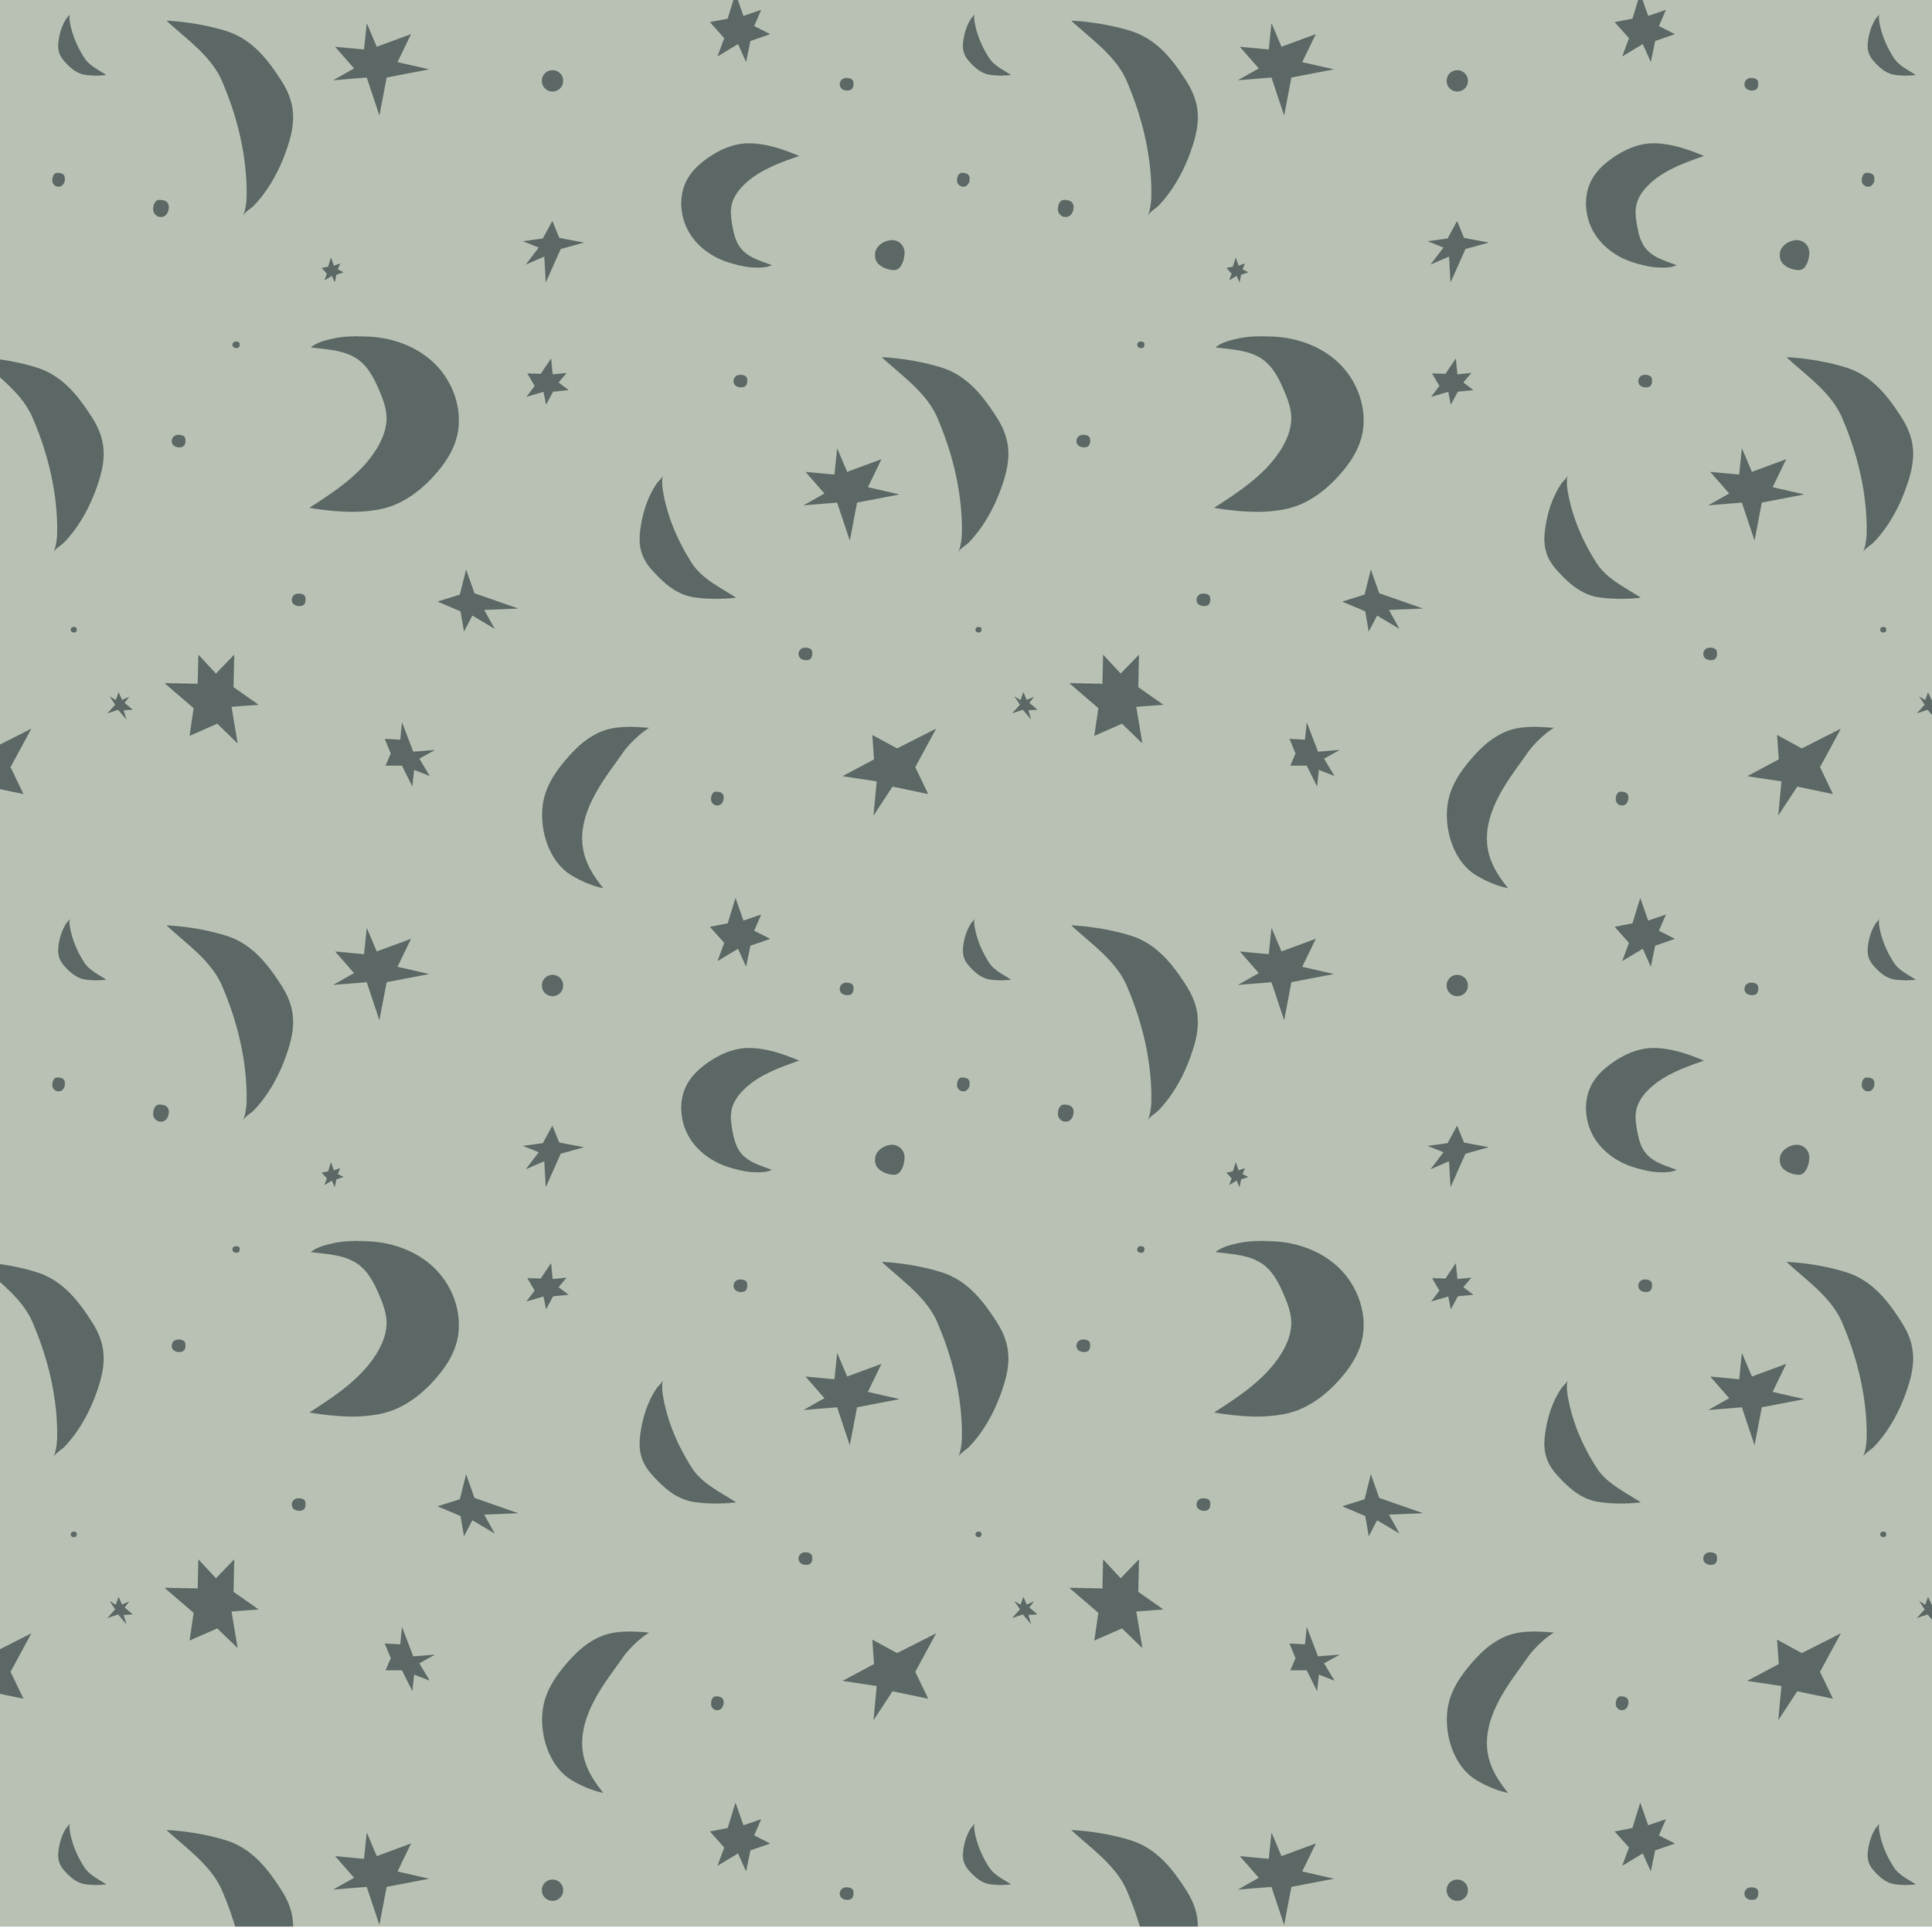 starmoon_pattern.png